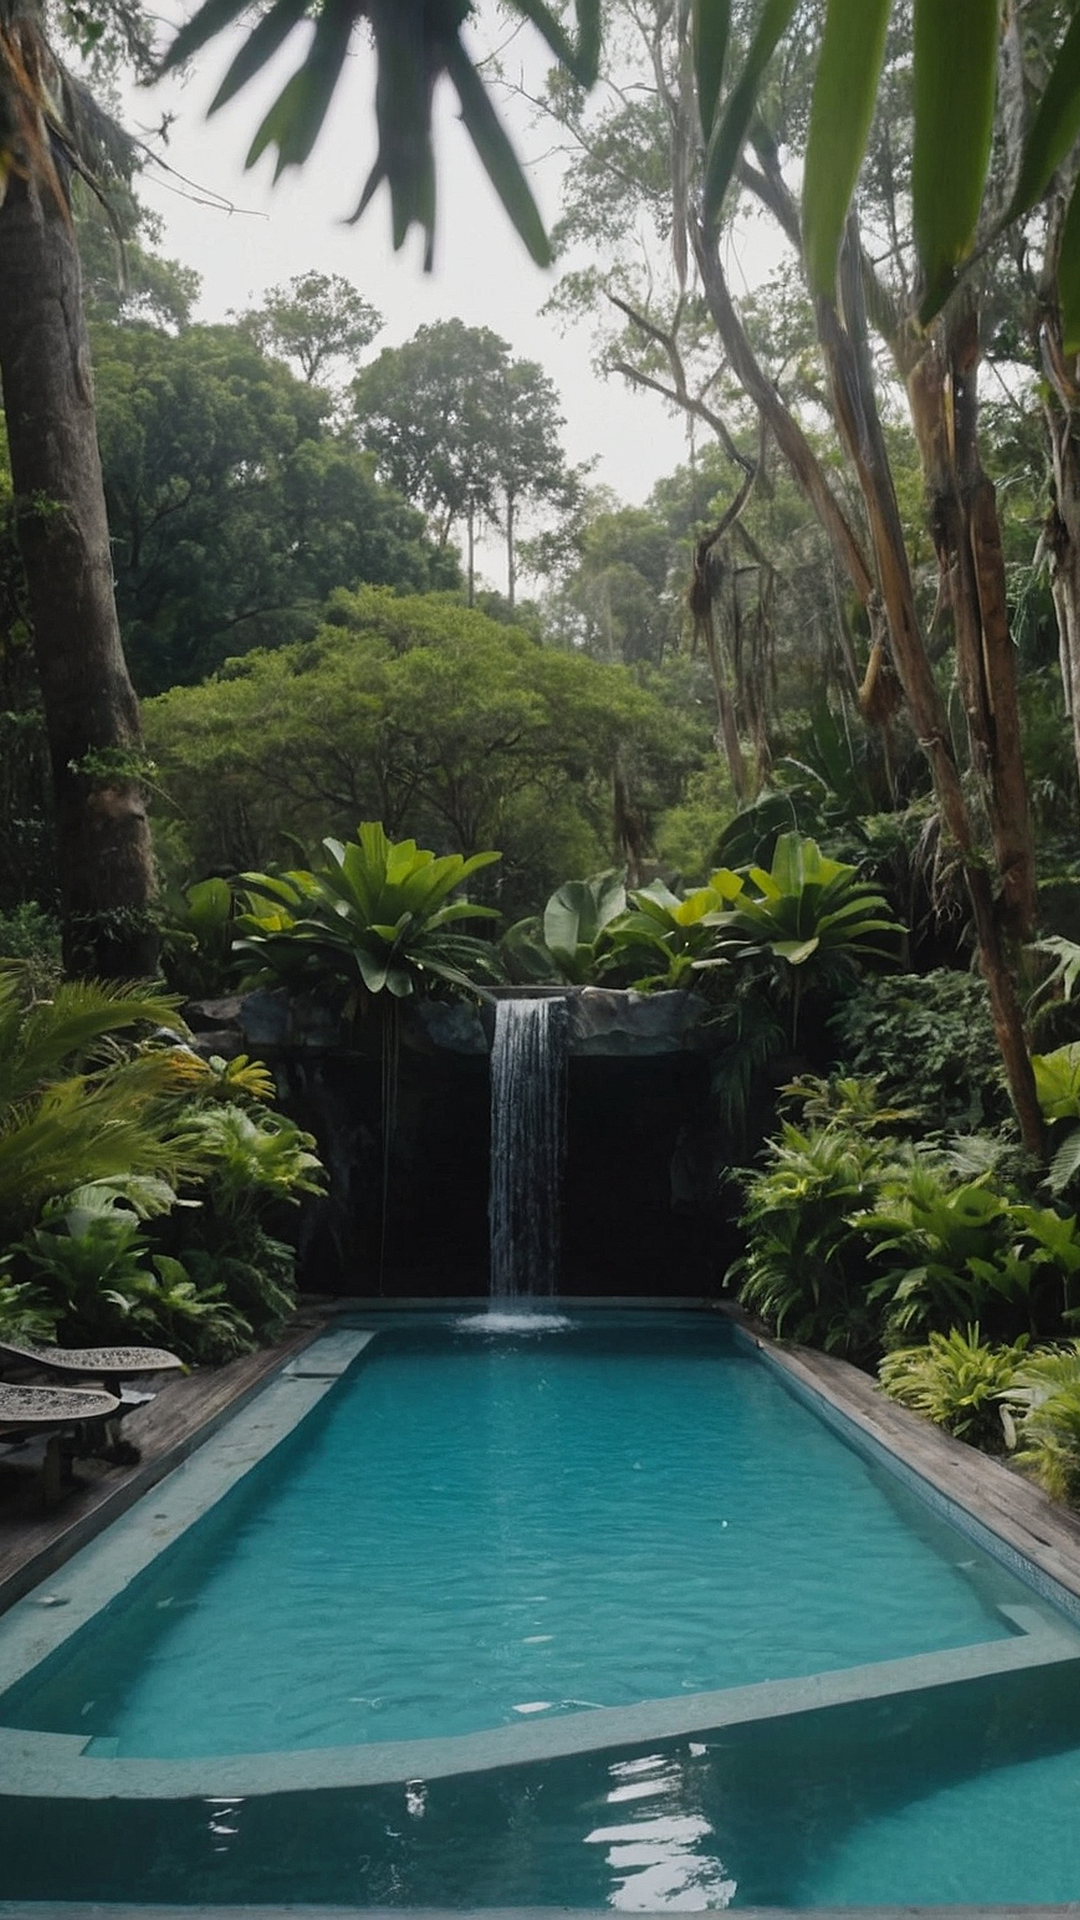 Coastal Escape: Pool Ideas Inspired by Nature's Beauty